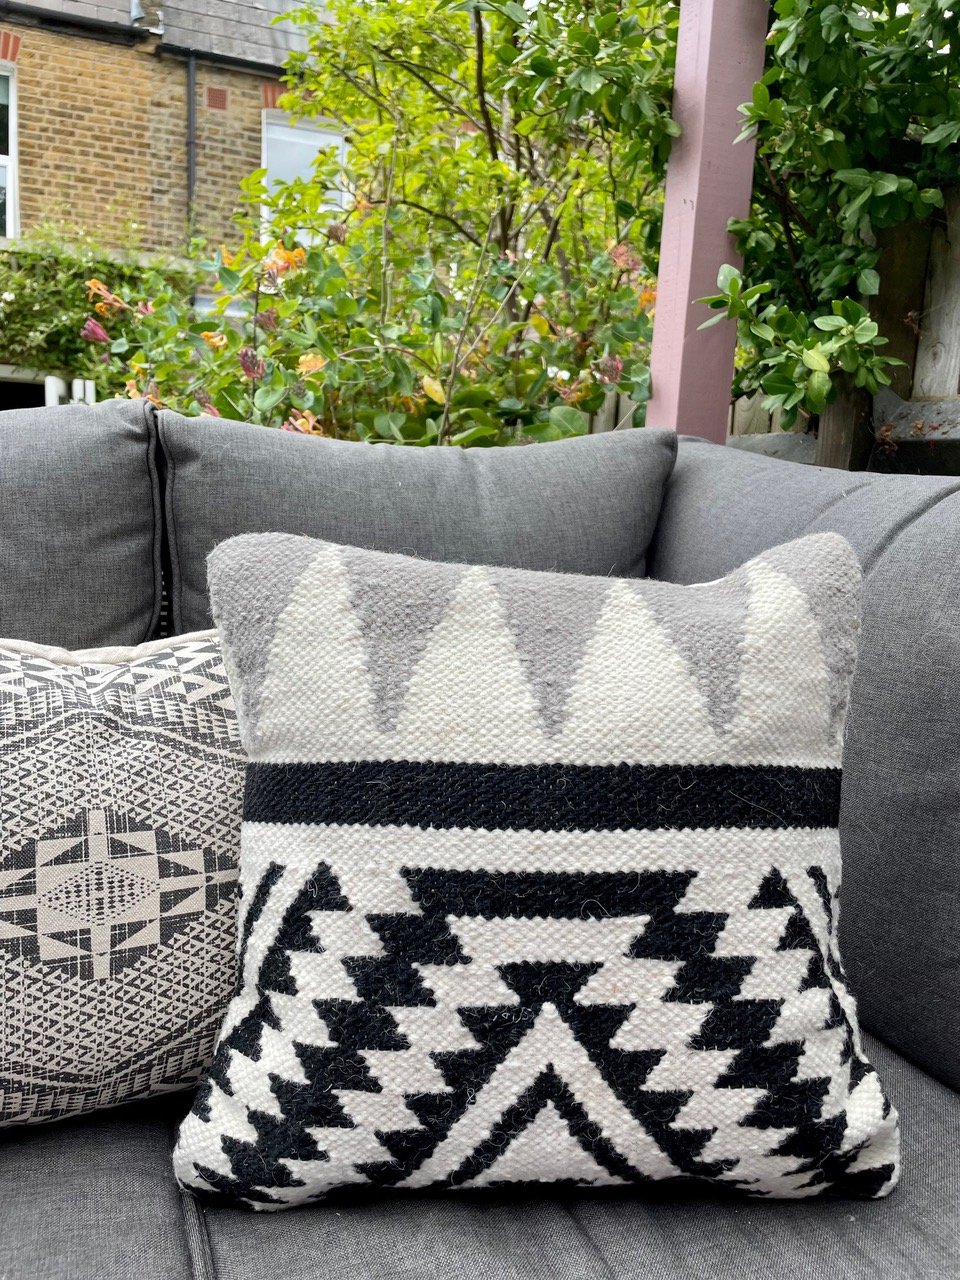 Boho cushions for styling outside dining